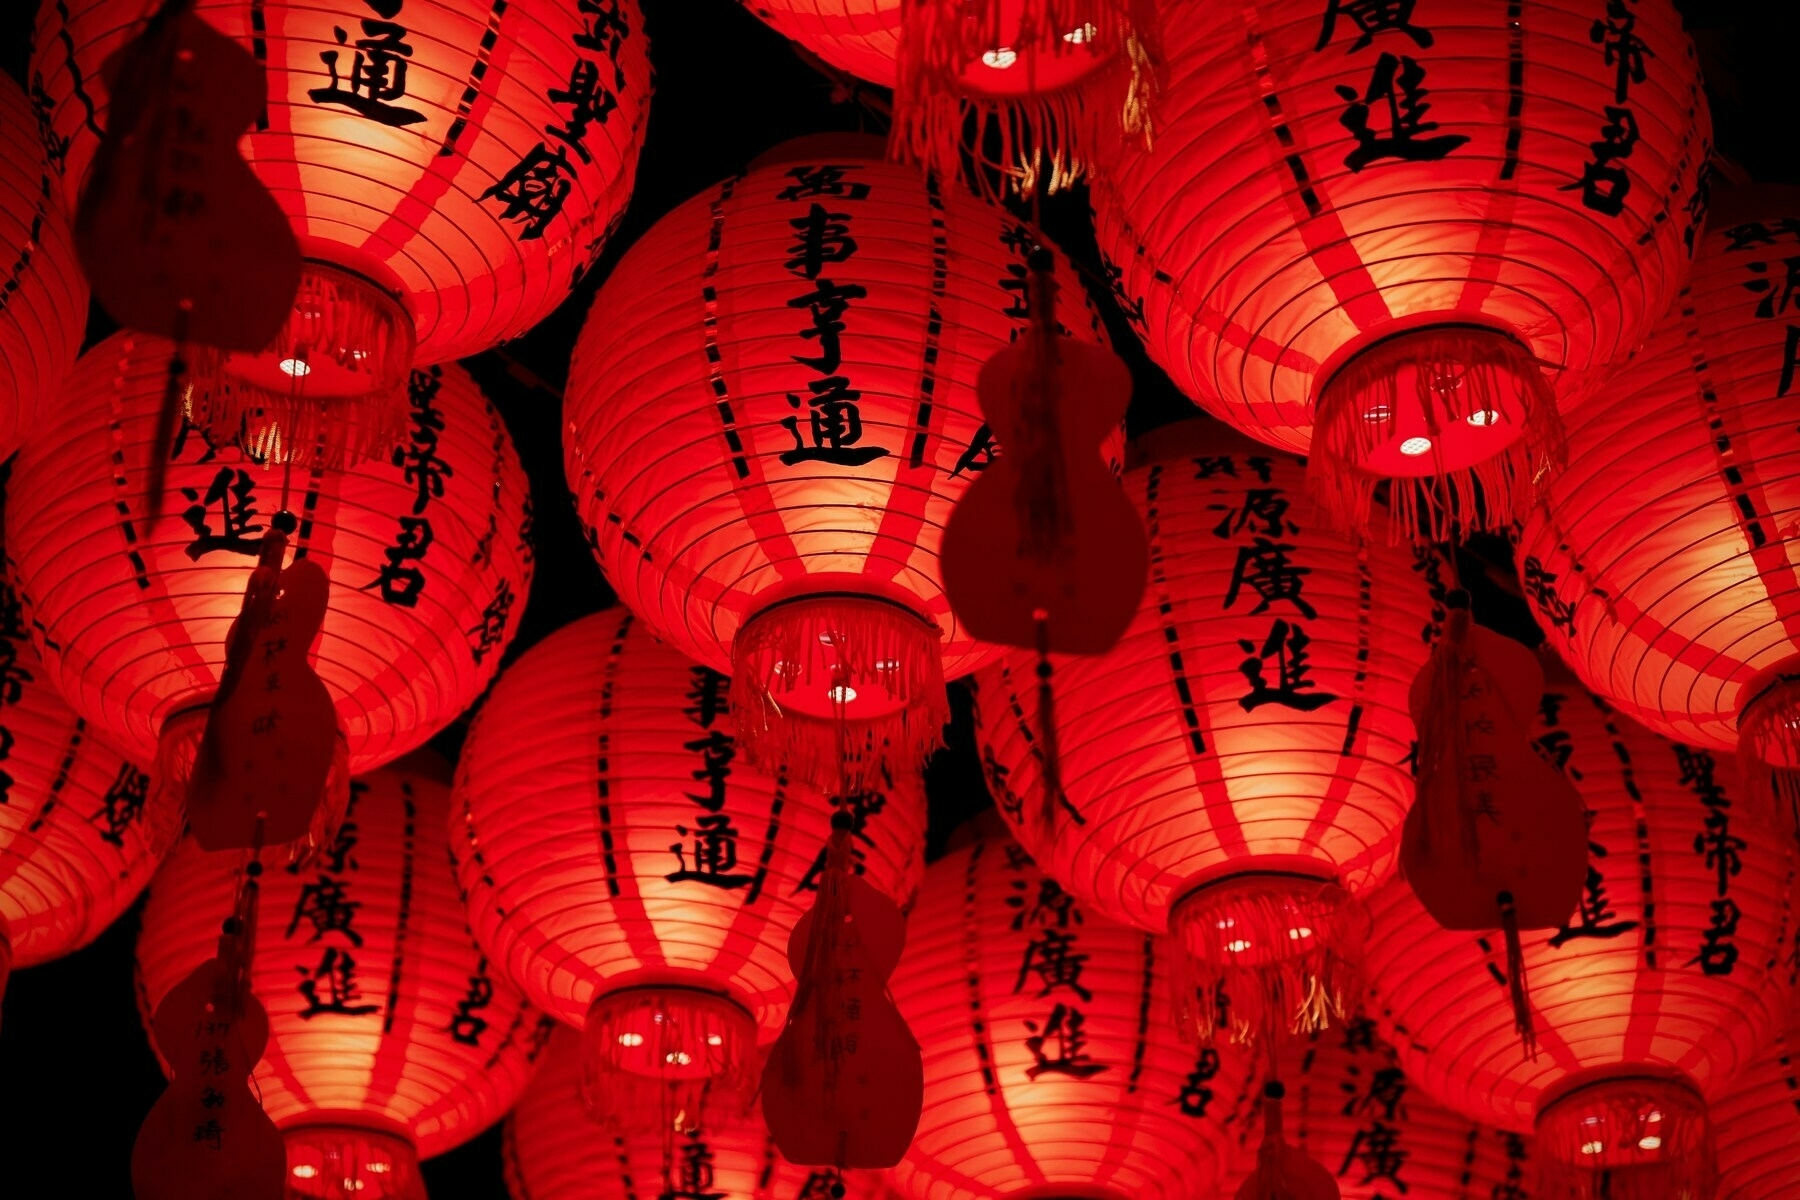 A collection of illuminated red Chinese lanterns with tassels and inscriptions, closely clustered against a dark background, creating a luminous and festive display.